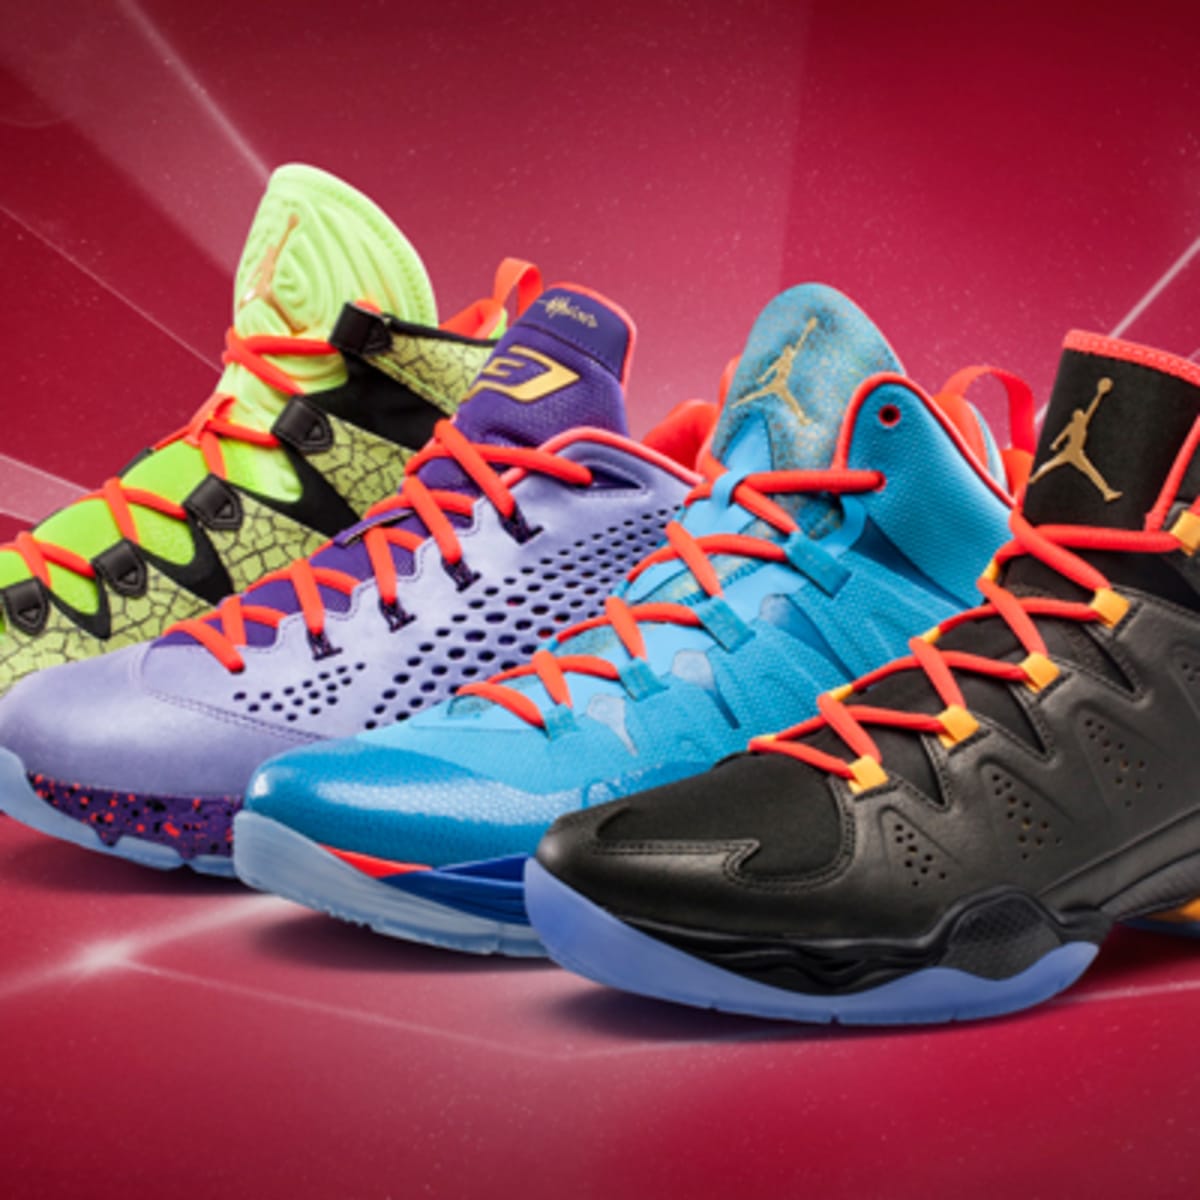 Jordan Brand unveils All-Star sneakers for Carmelo Anthony, Chris Paul, Blake  Griffin - Sports Illustrated